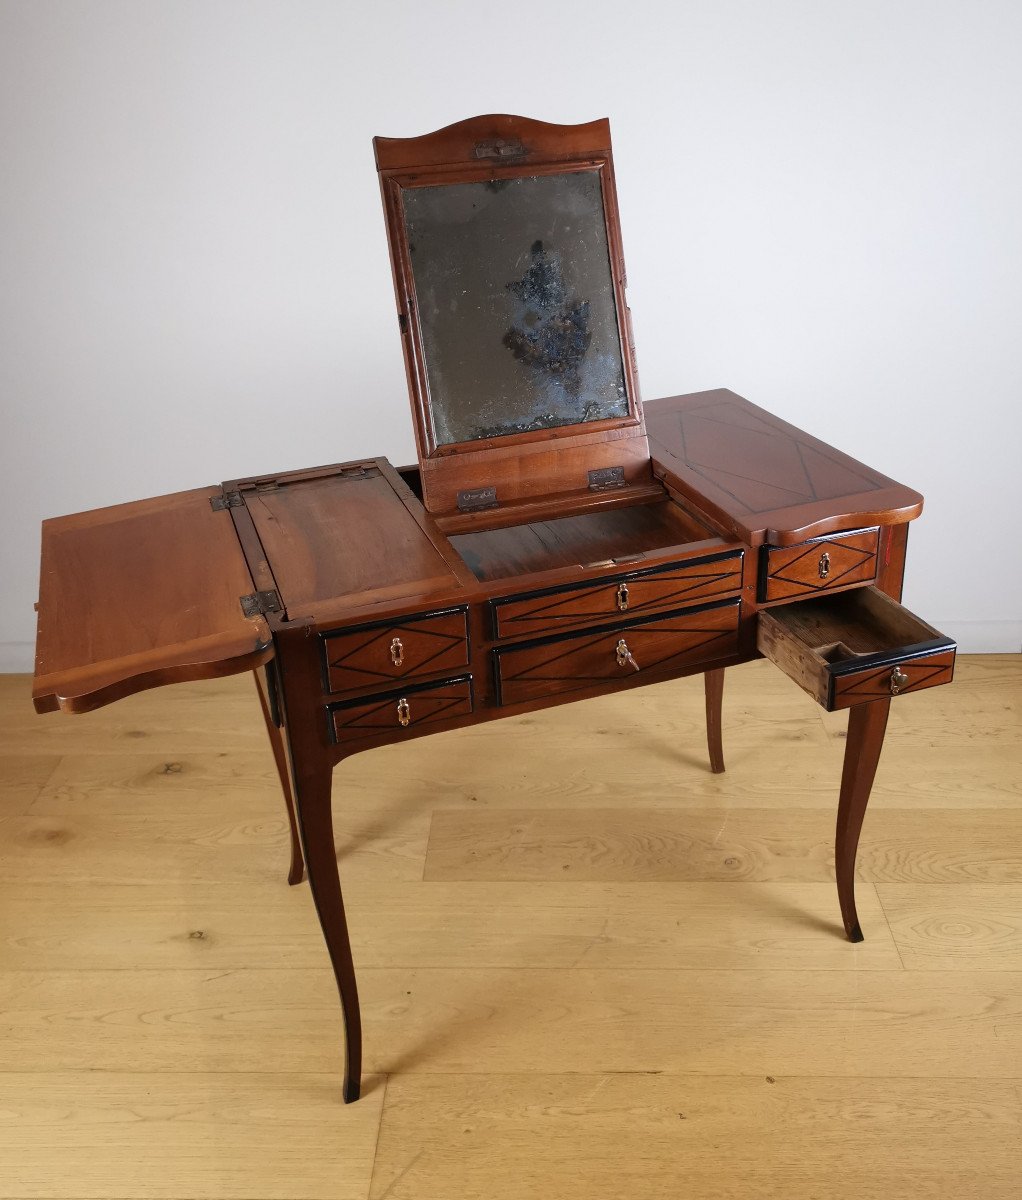 A Louis XV Dressing Table Of Dauphiné, Mid18th Century 1750-1760-photo-4